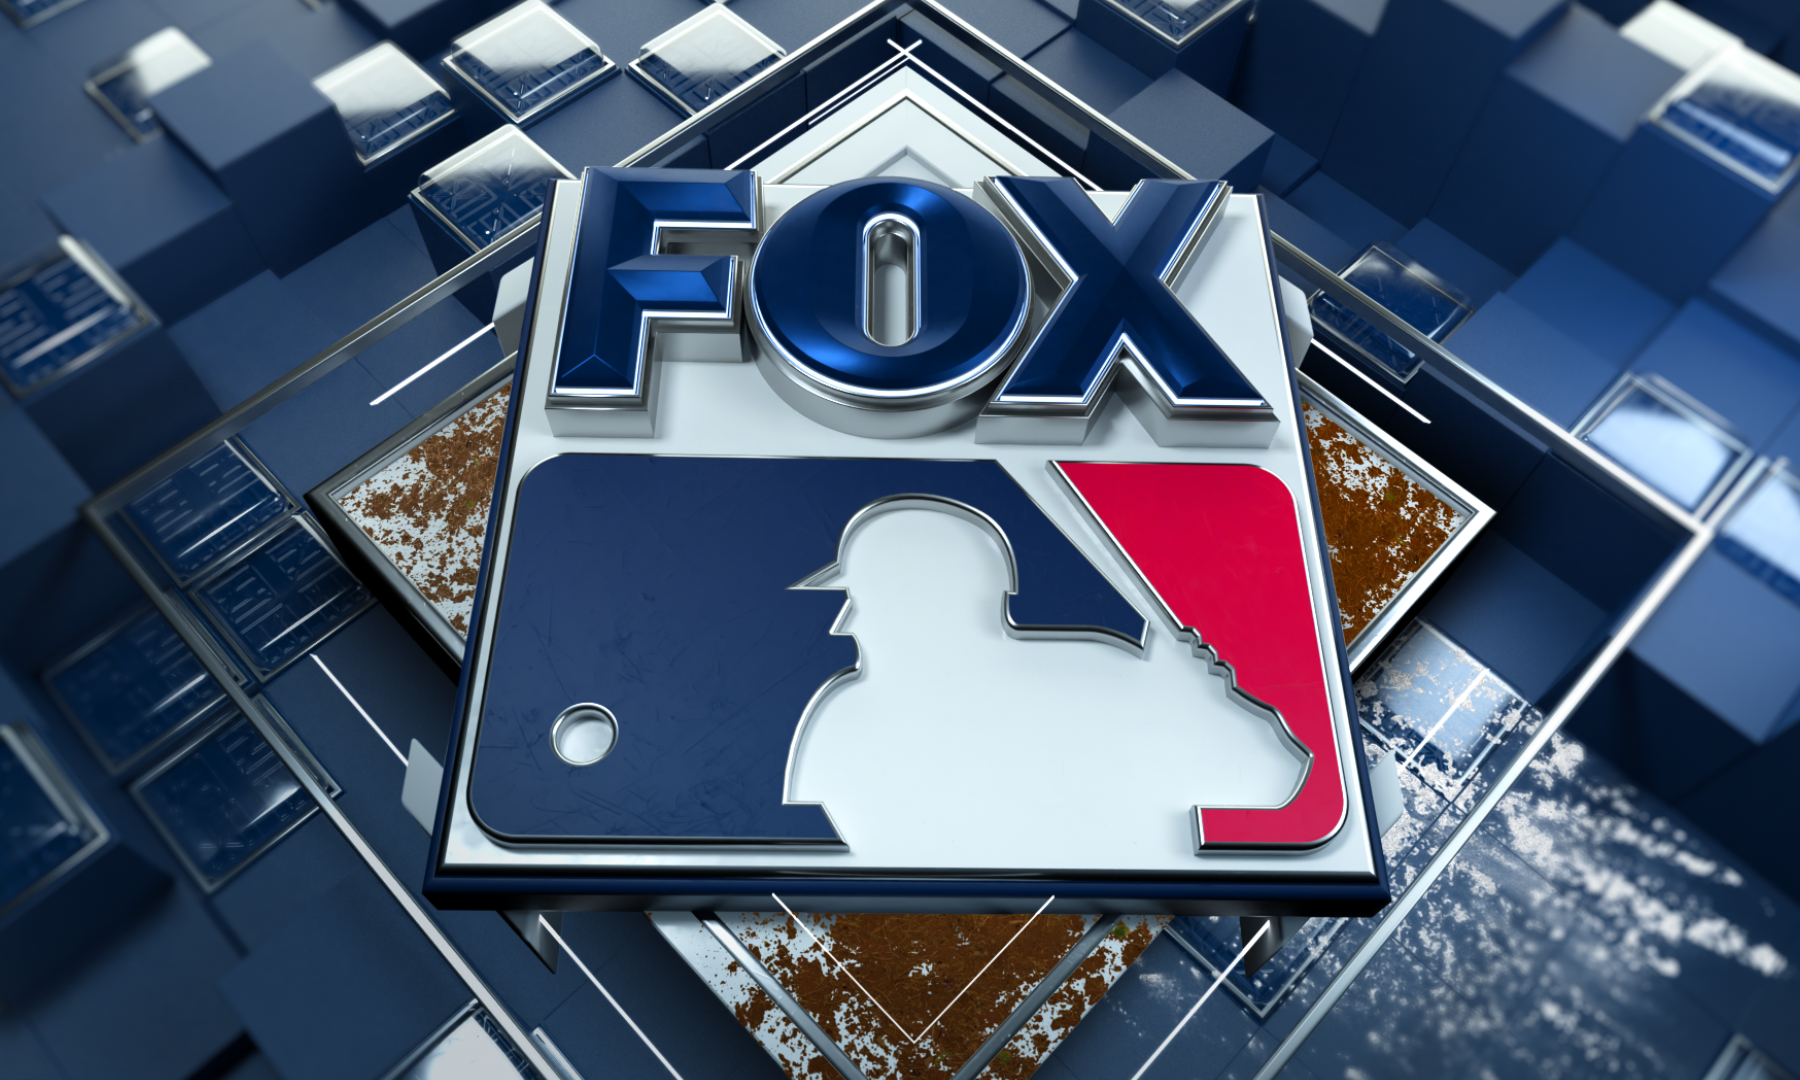 Fox Sports Steps Up to the Plate With Big Audio Plans